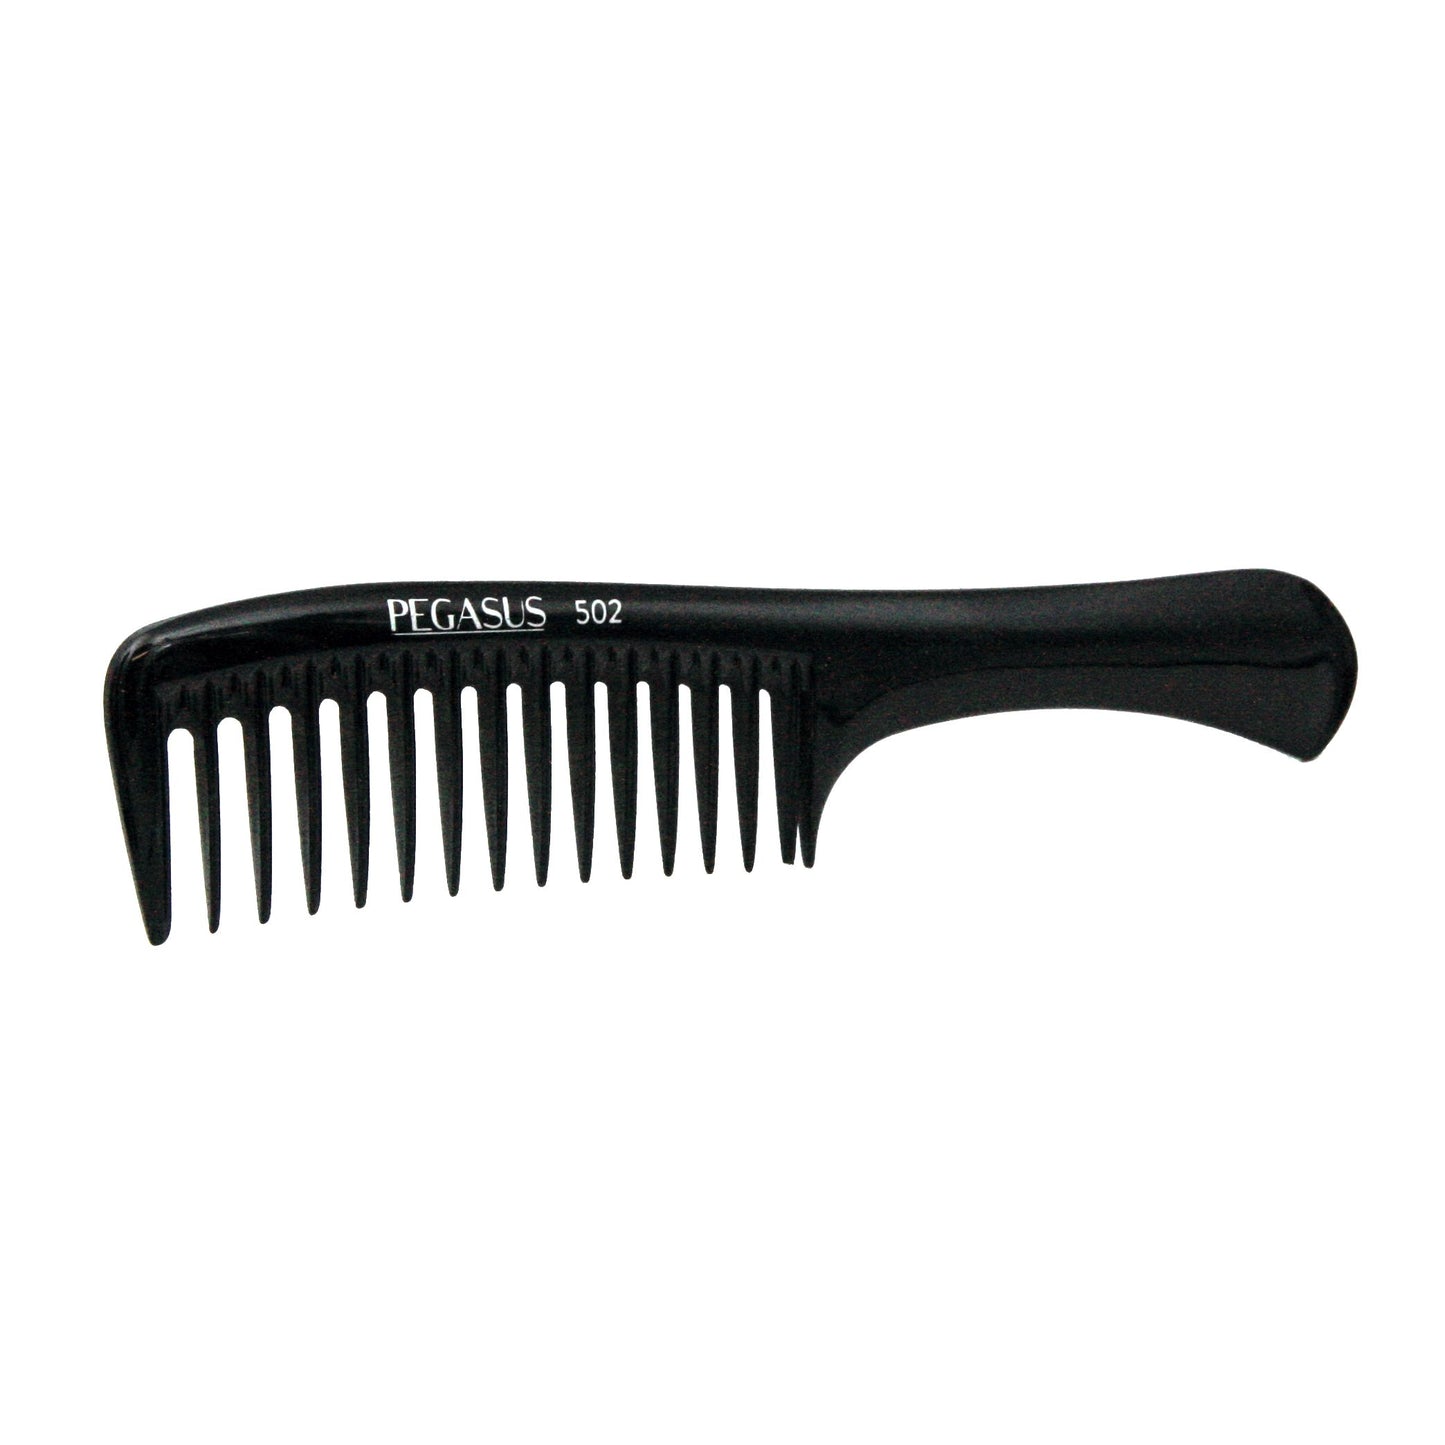 Pegasus 502, 9in Hard Rubber Wide Tooth Handle Comb, Handmade, Seamless, Smooth Edges, Anti Static, Heat and Chemically Resistant, Wet Hair, Everyday Grooming Comb | Peines de goma dura - Black